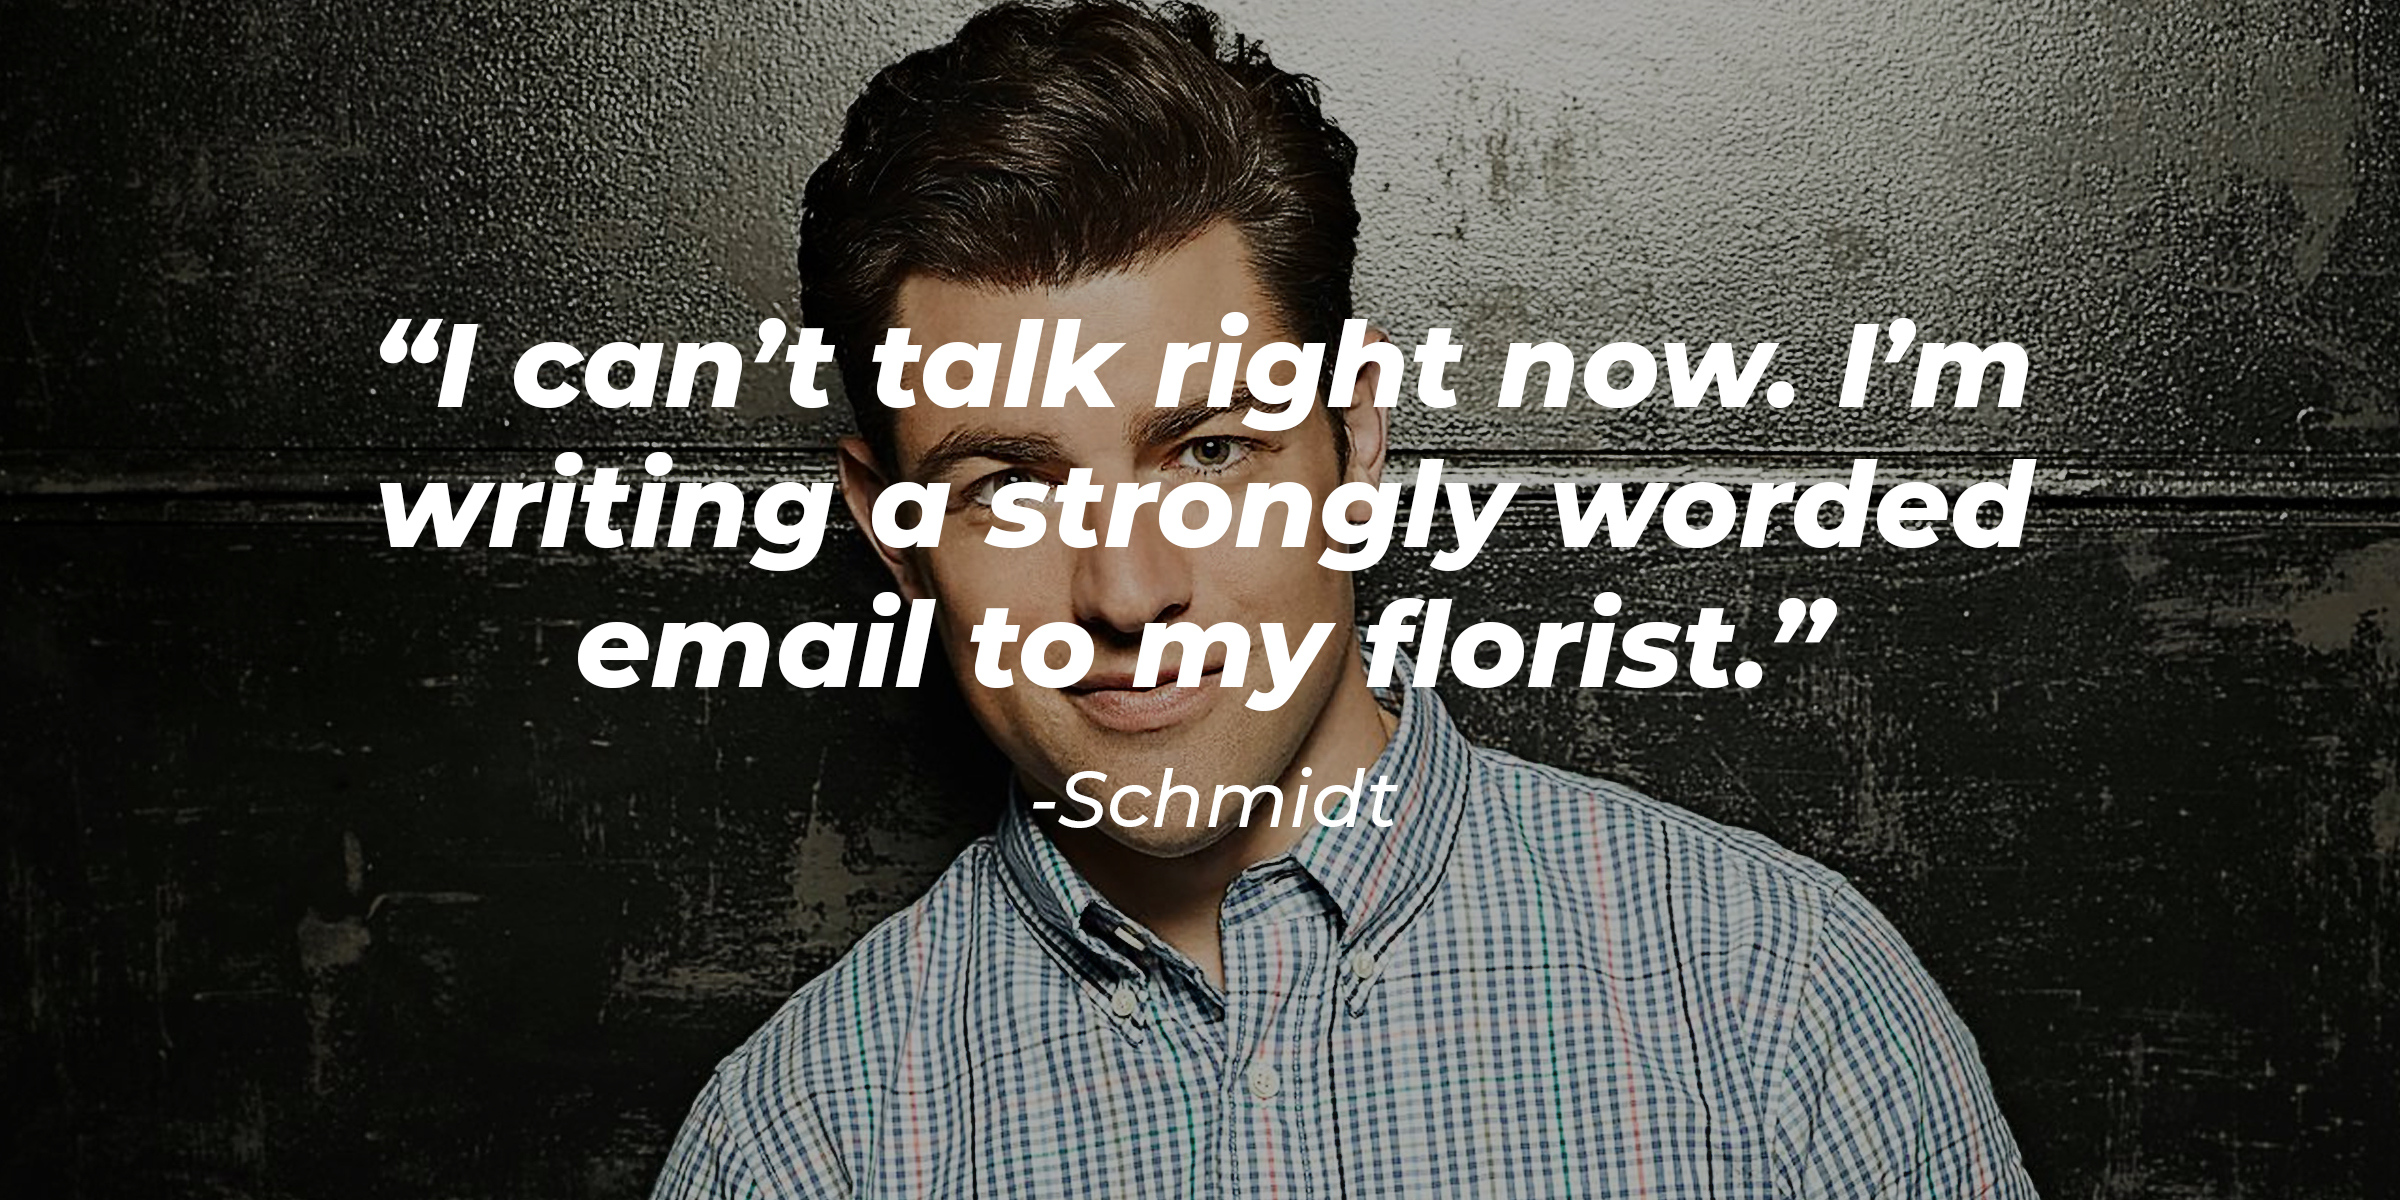 Schmidt's quote: “I can’t talk right now. I’m writing a strongly worded email to my florist.” | Source: Facebook/OfficialNewGirl